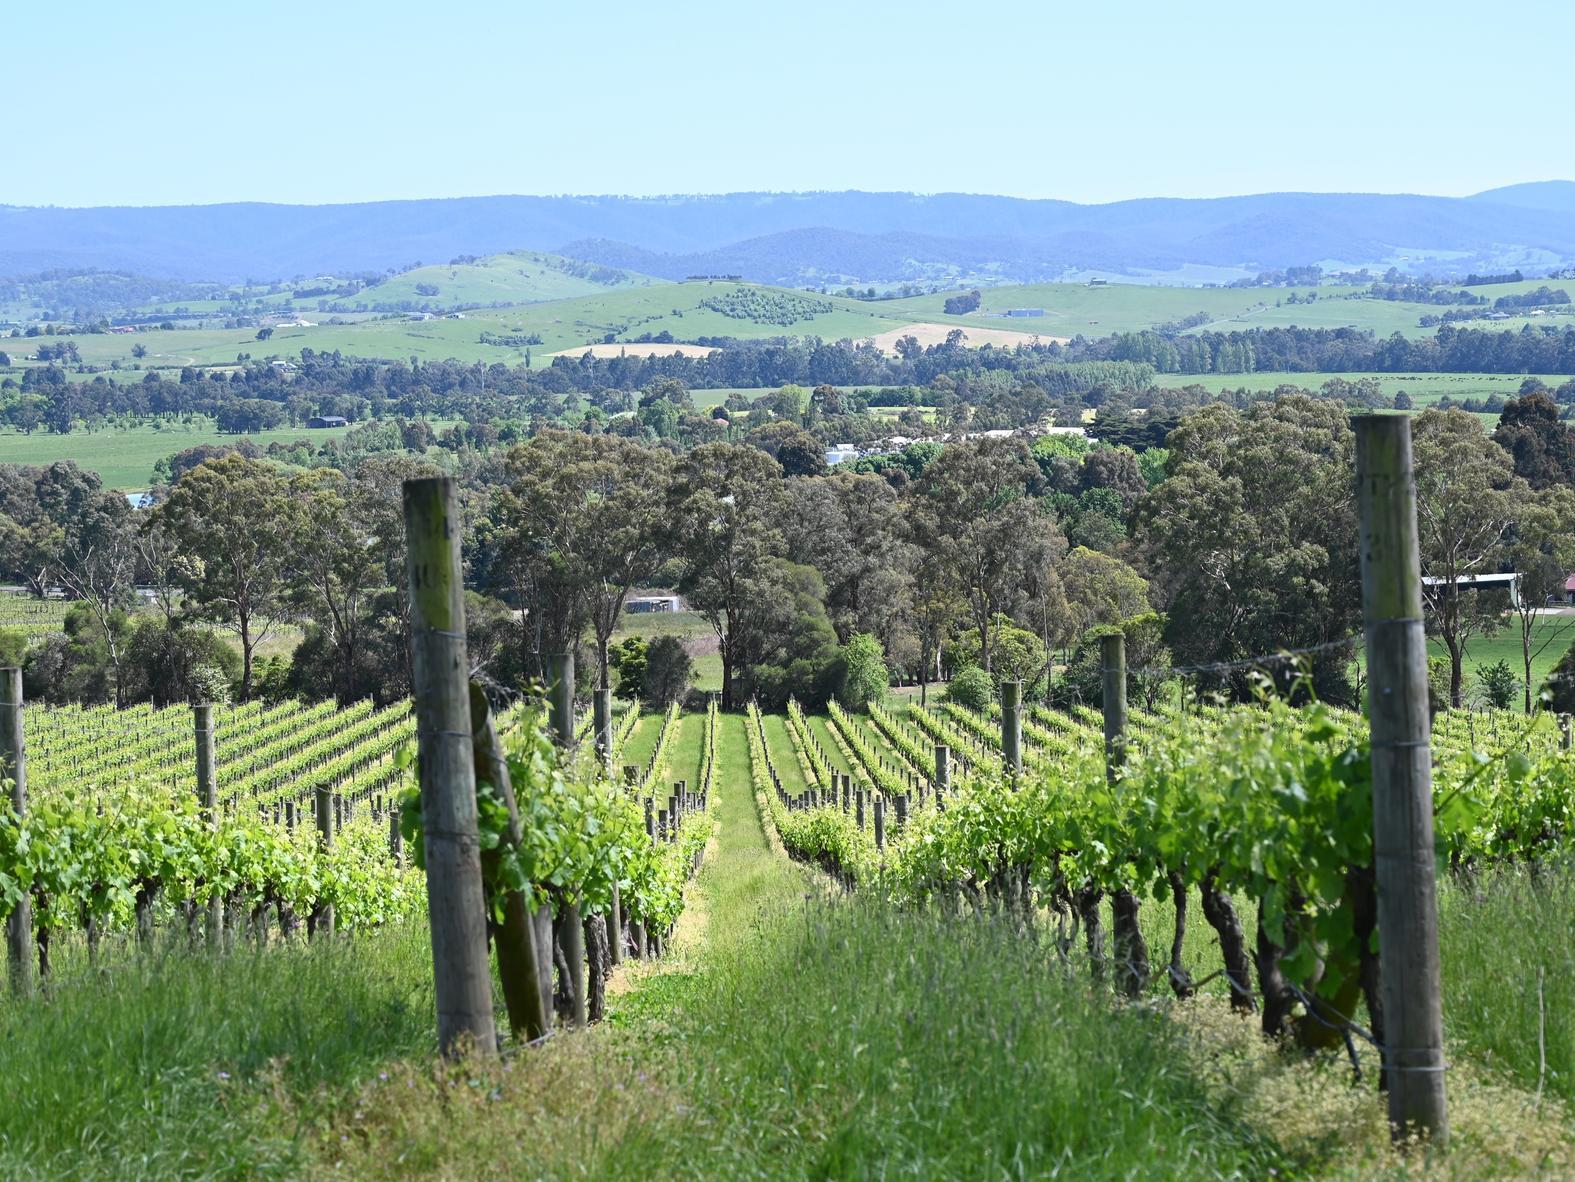 Australia Is Home To Some Great Wine Regions  And The Yarra Valley Is One Well Worth Exploring photo